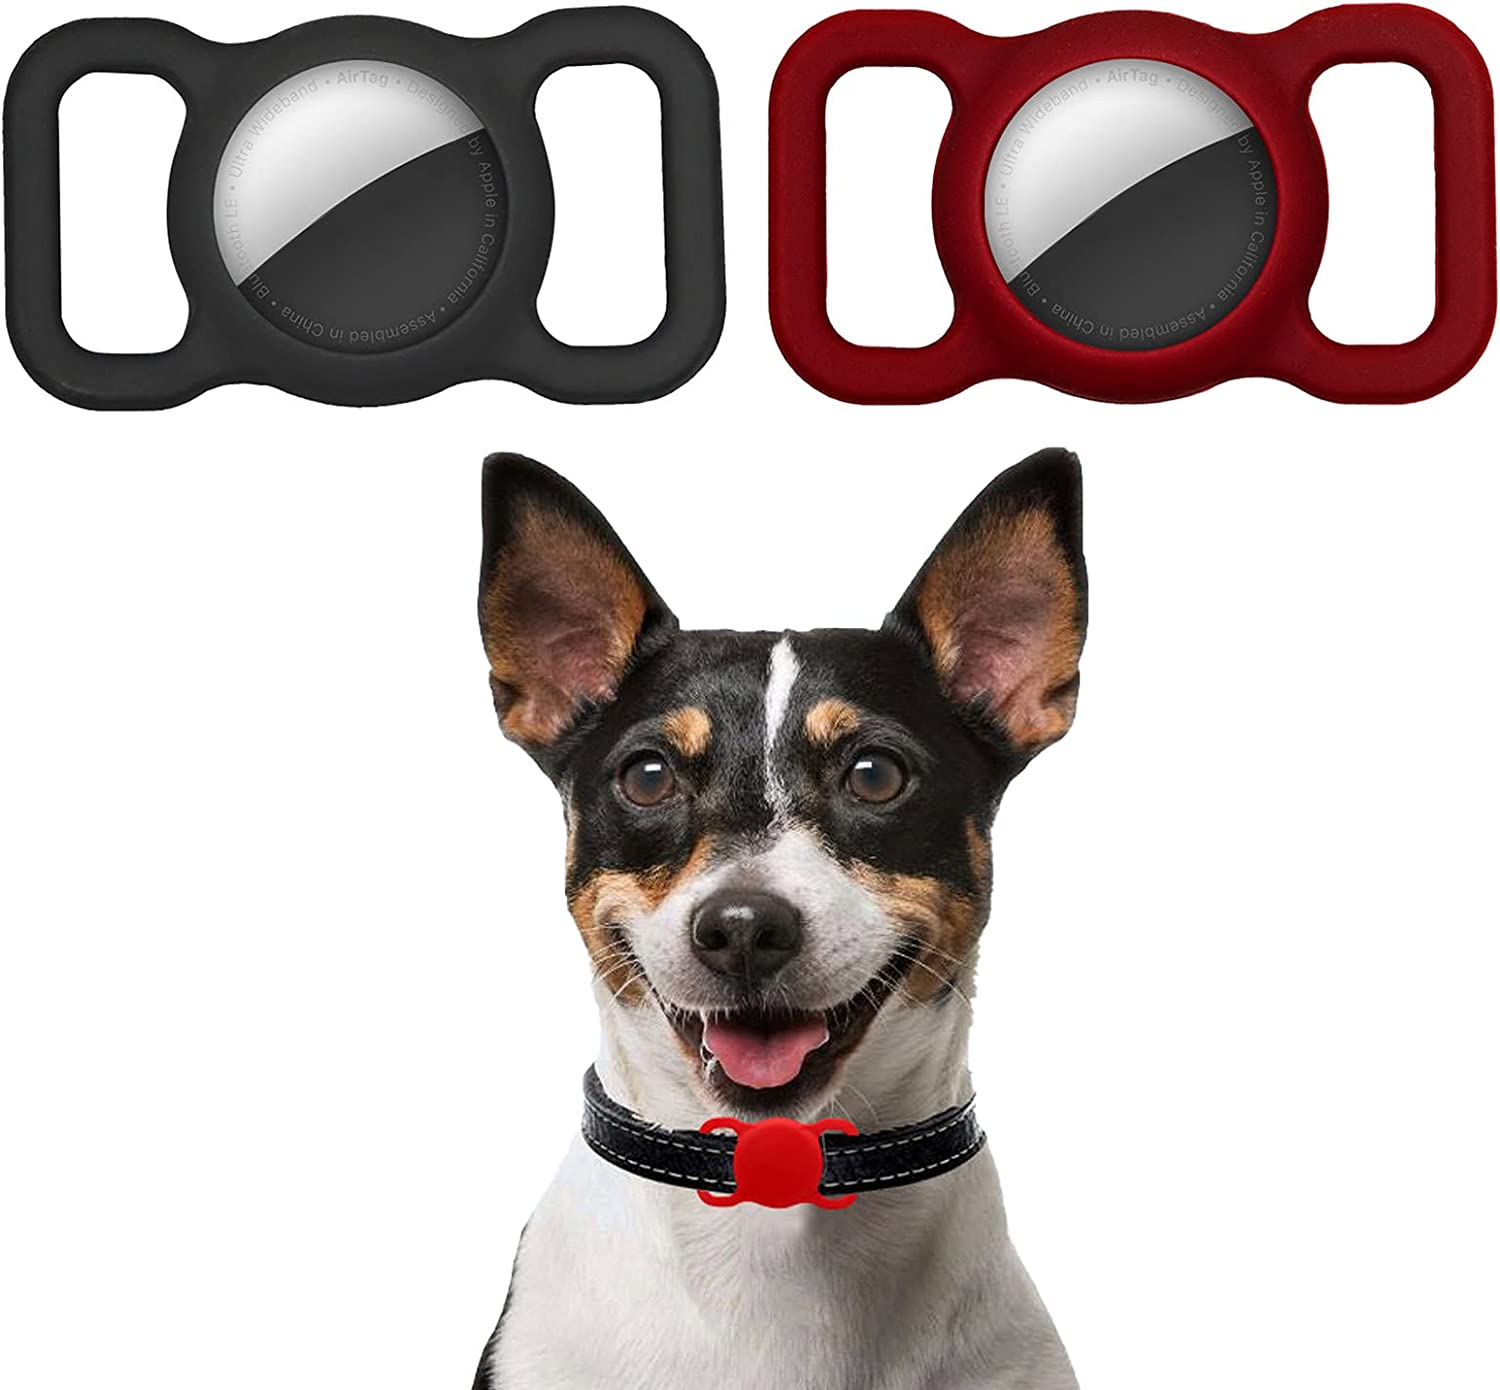 Air Tag Dog Collar Holder Waterproof Small Compatible Protective Cover for Apple Airtag GPS Tracking Dog Cat Soft Silicone Waterproof Protective for Pet Dog Cat and Children Elderly Bags